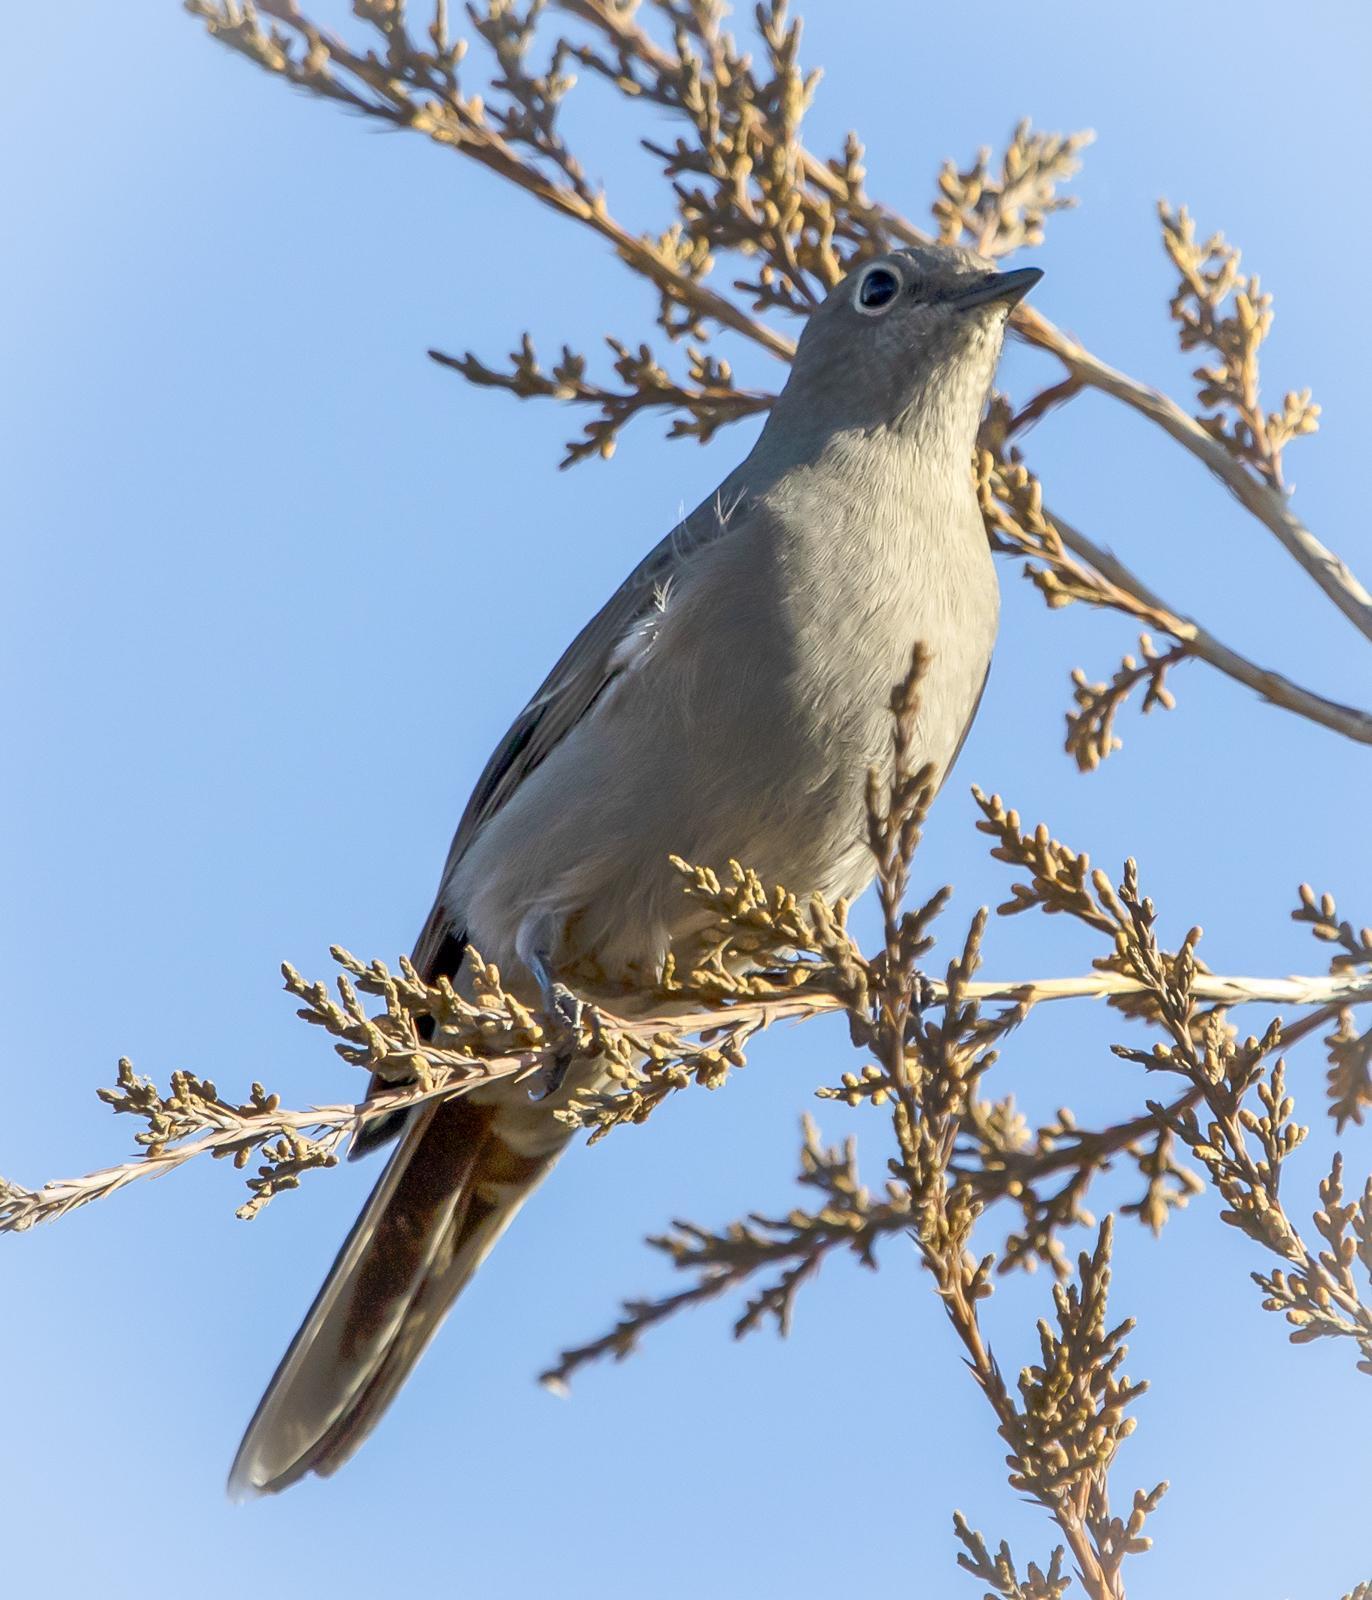 Townsend's Solitaire Photo by Tom Gannon